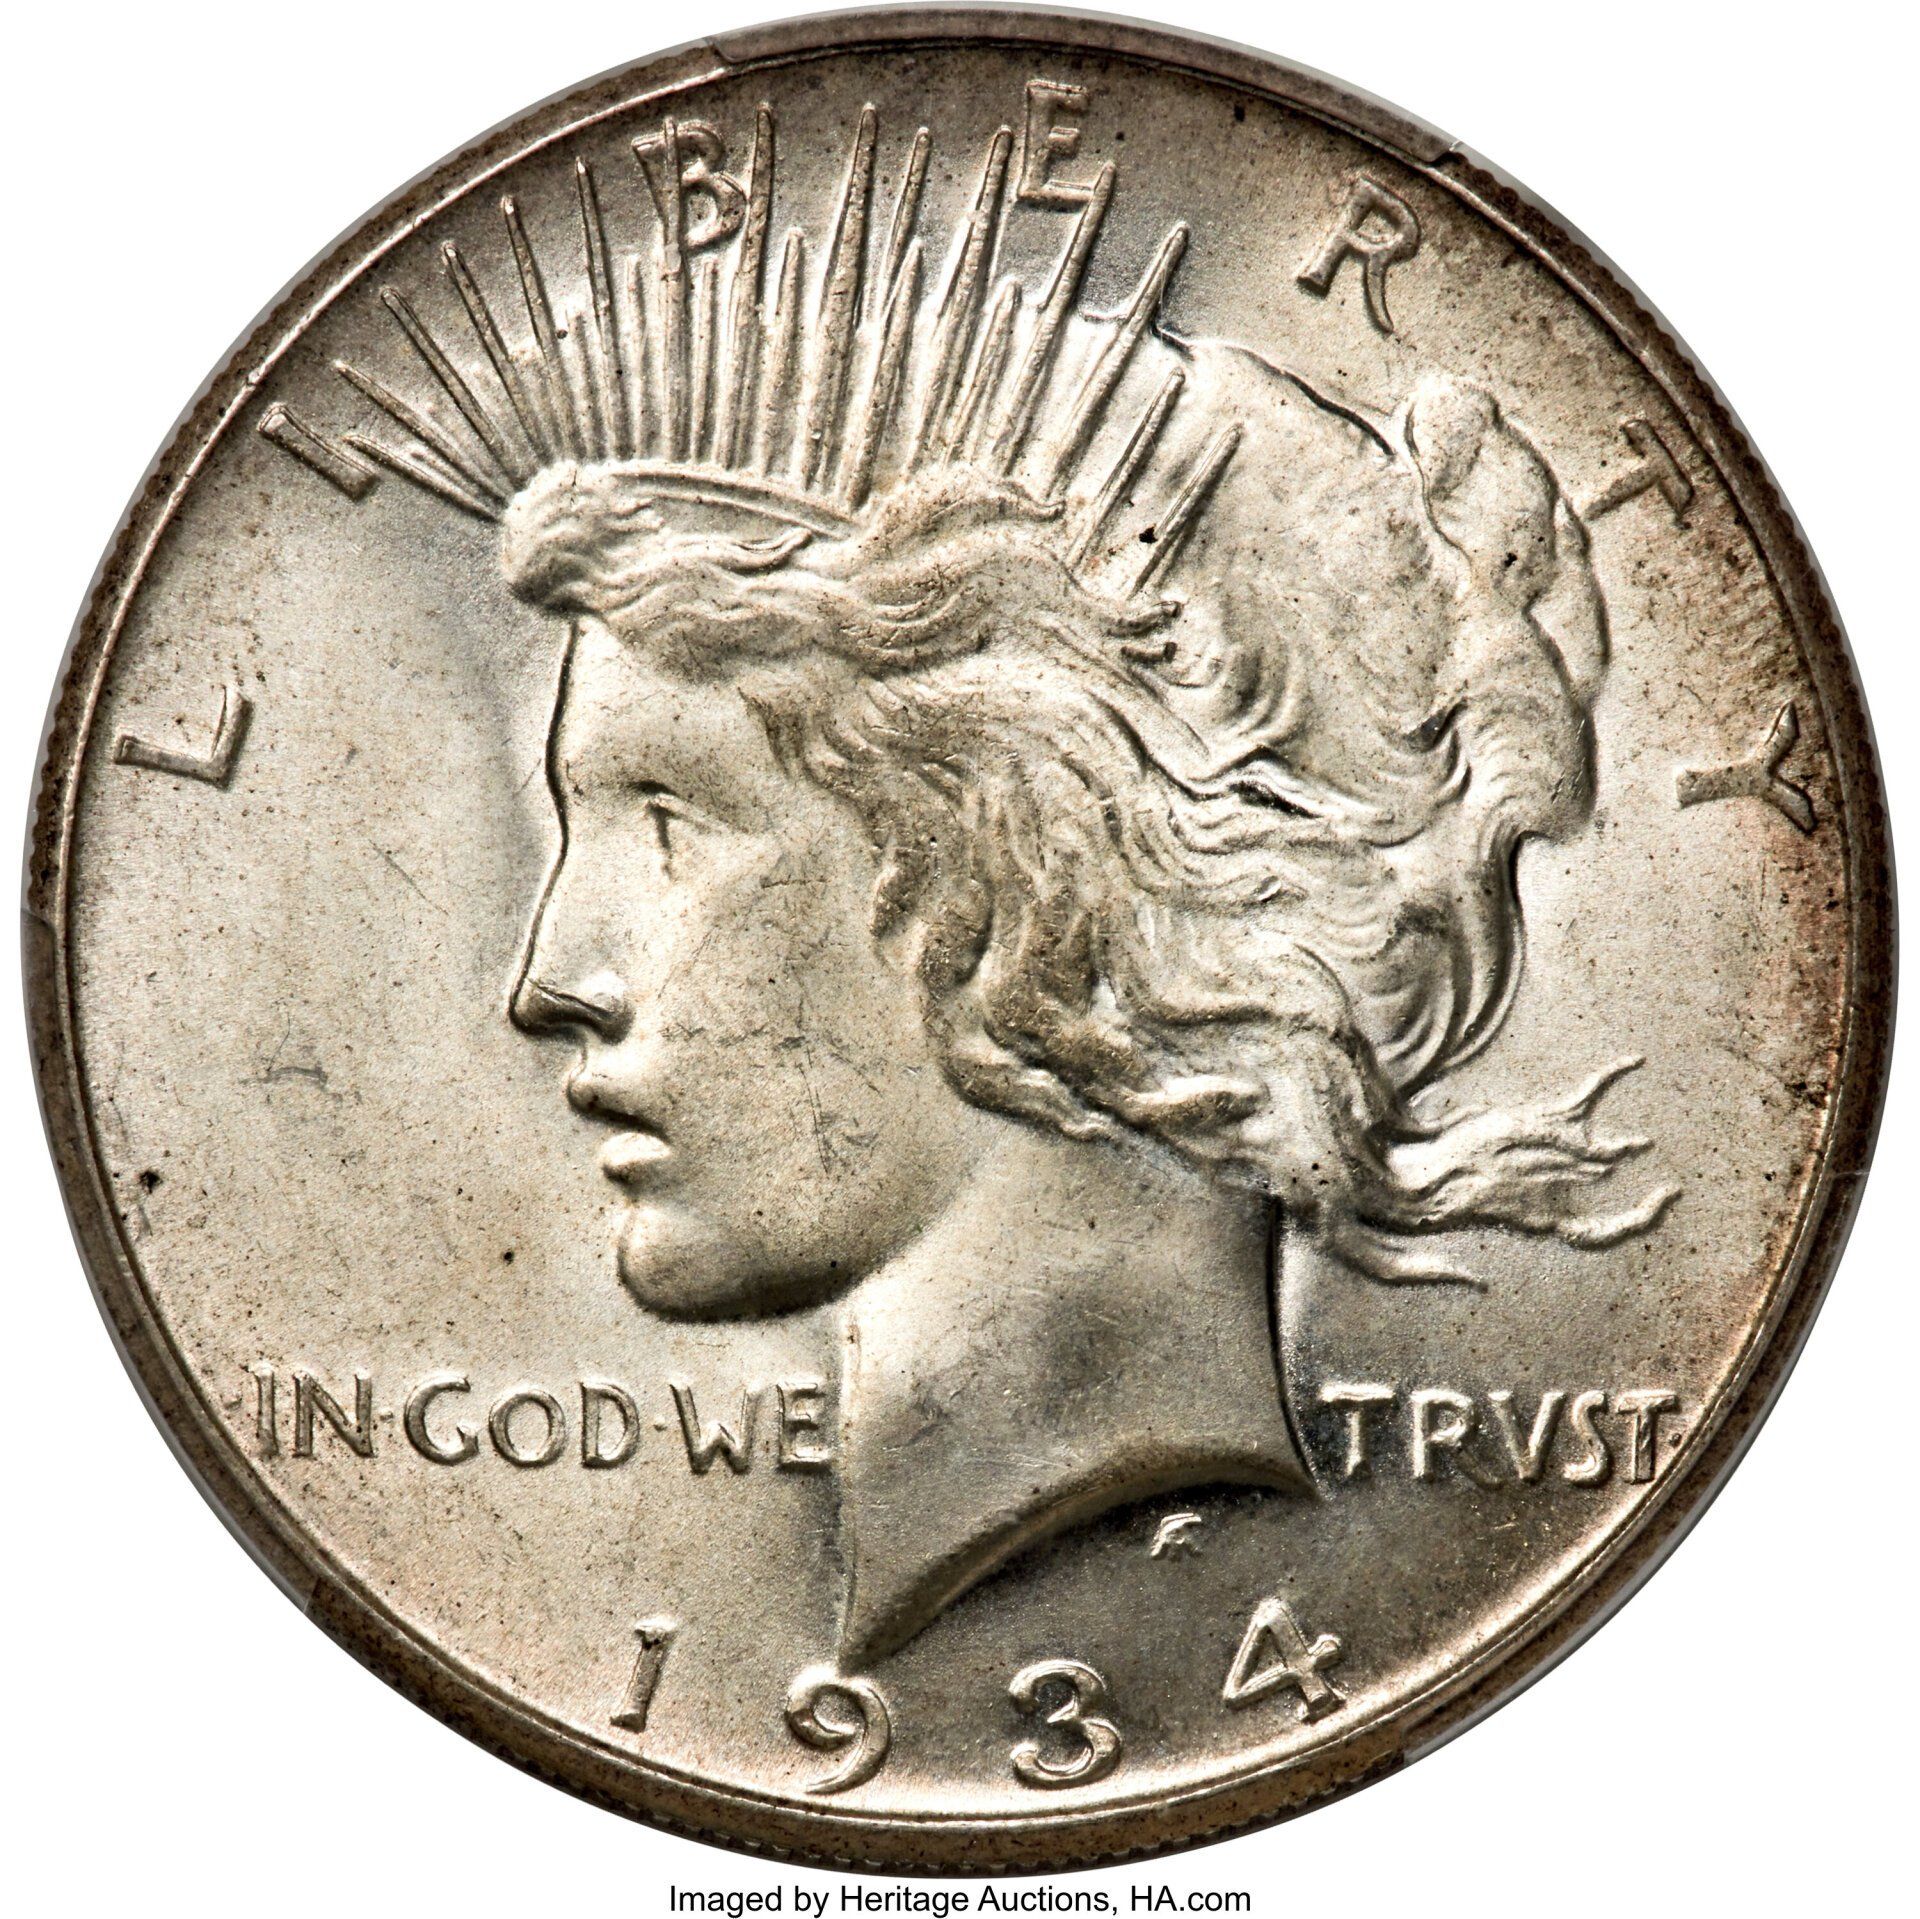 1934 S Peace Dollar Offered by Heritage Auctions, HA.com